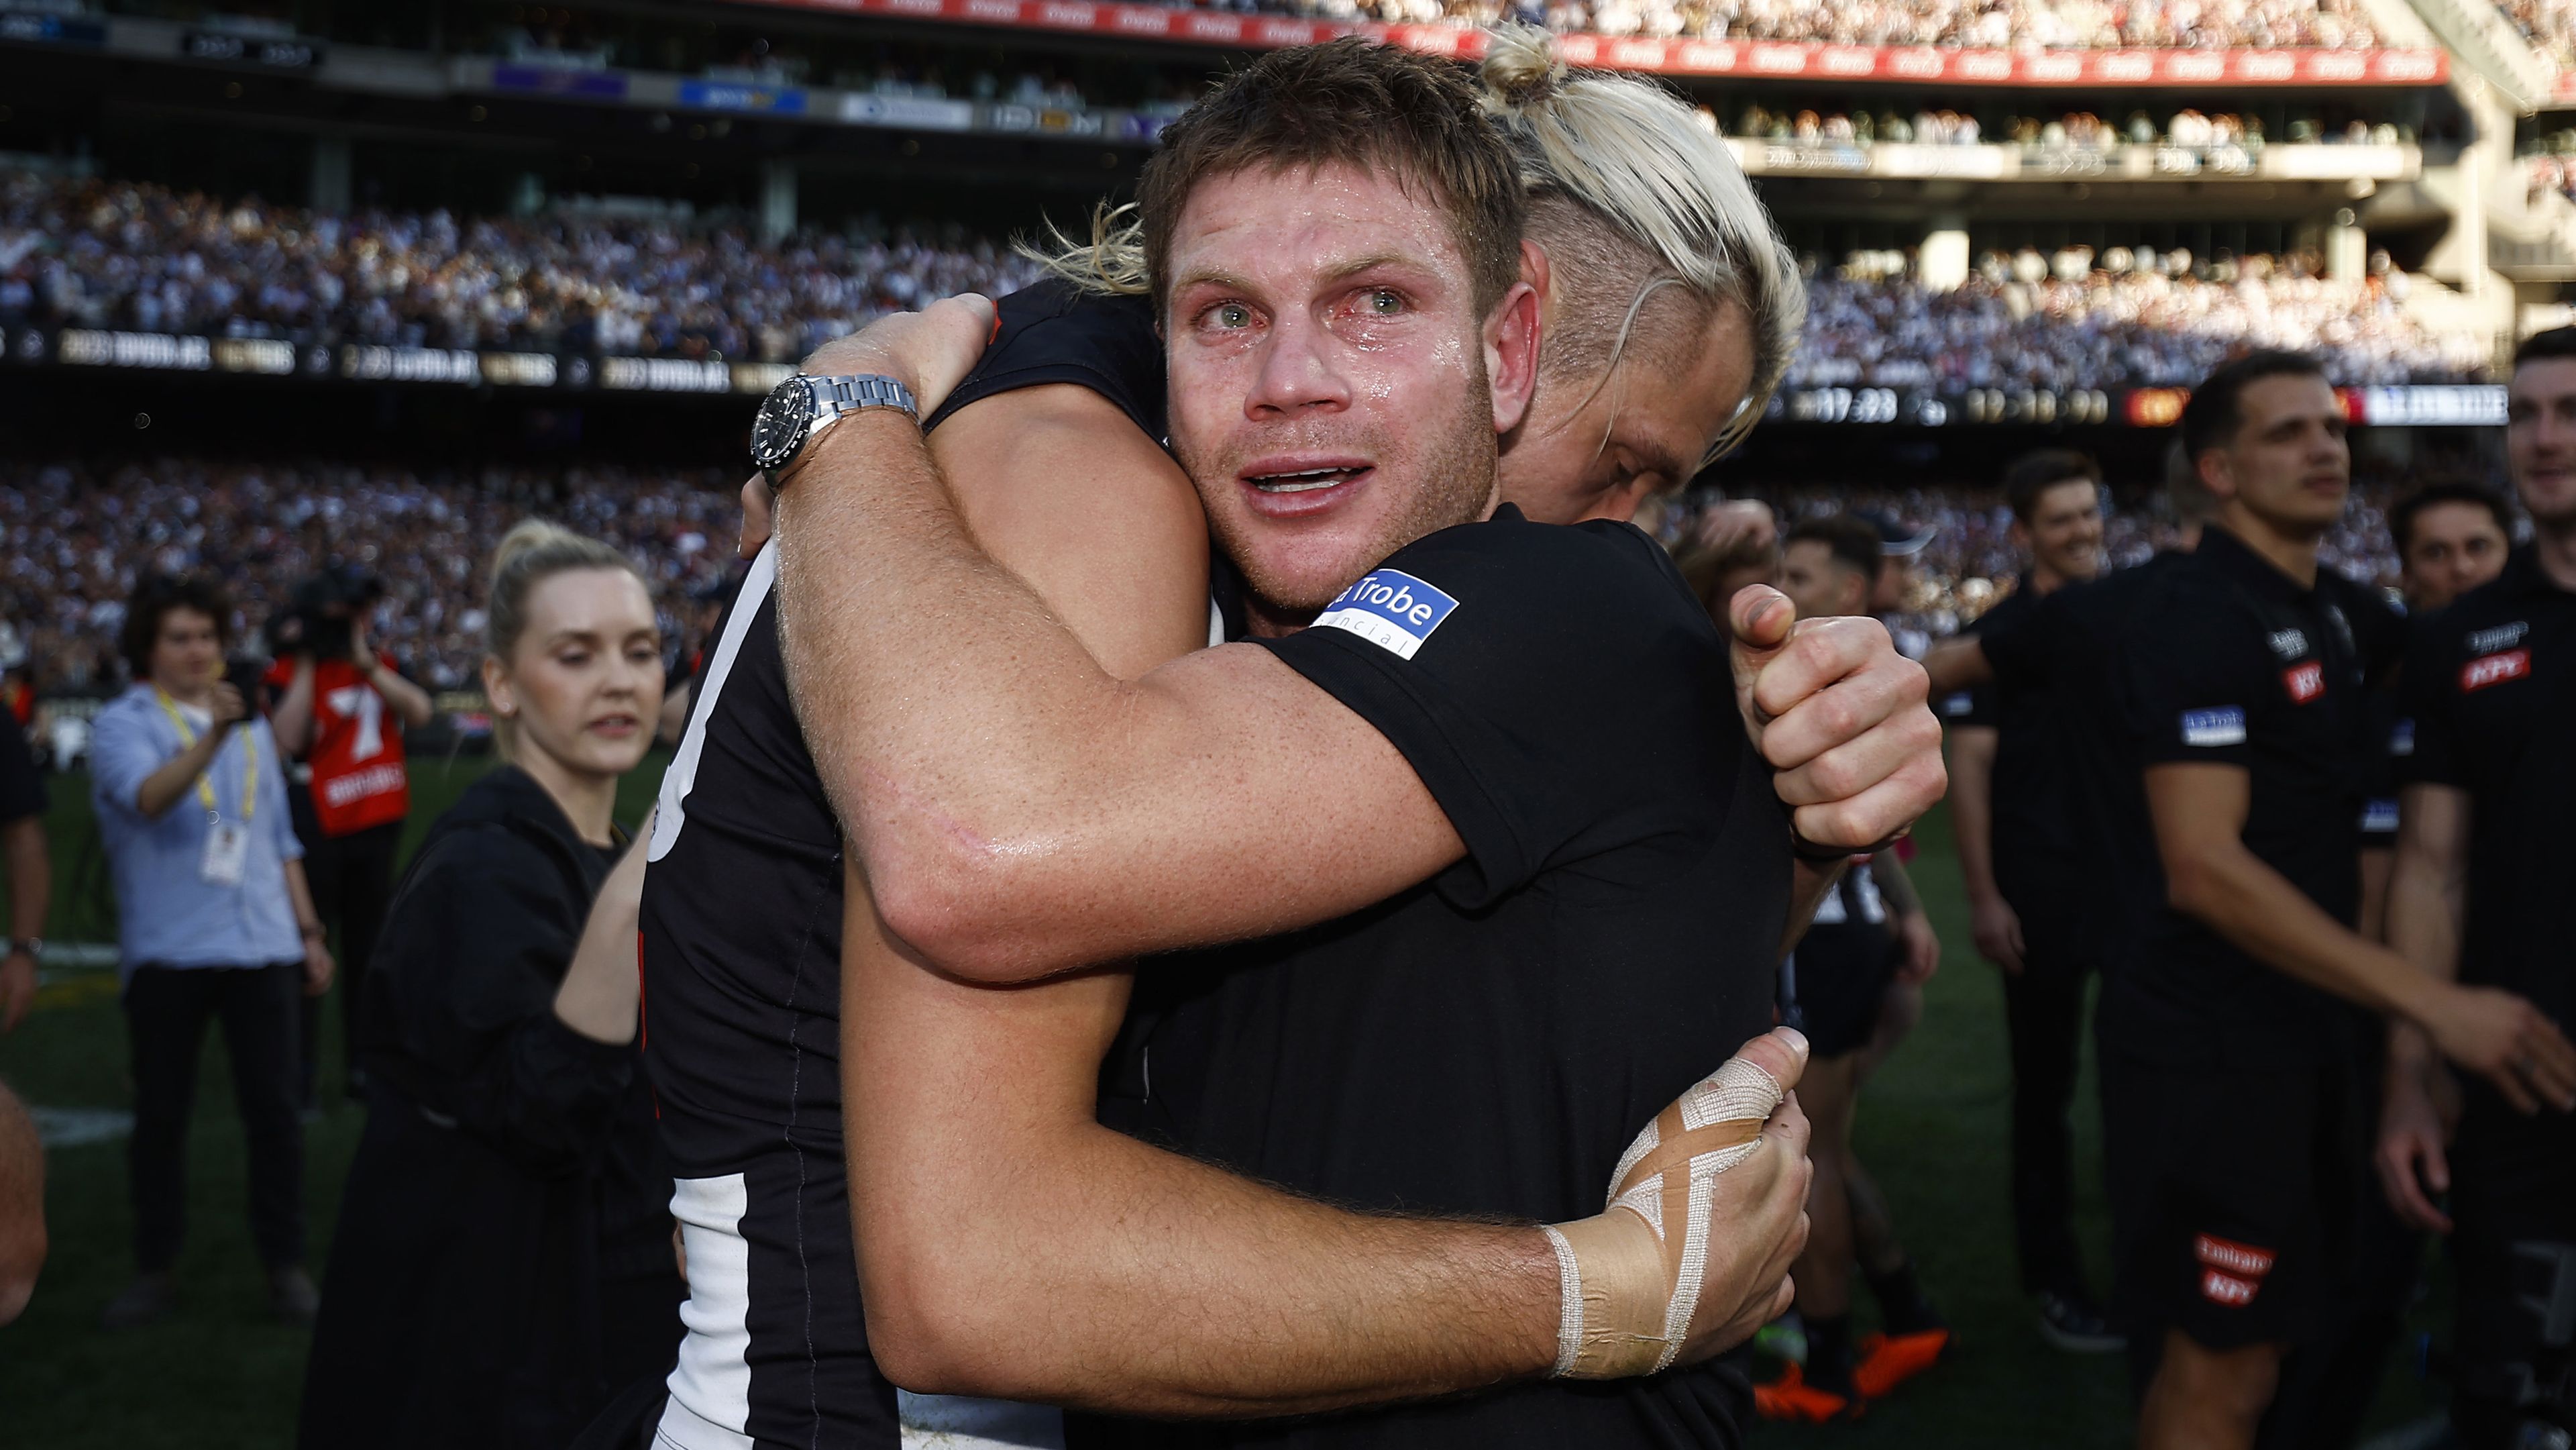 MELBOURNE, AUSTRALIA - SEPTEMBER 30: An emotional Taylor Adams of the Magpies hugs Darcy Moore of the Magpies after the 2023 AFL Grand Final match between Collingwood Magpies and Brisbane Lions at Melbourne Cricket Ground, on September 30, 2023, in Melbourne, Australia. (Photo by Daniel Pockett/AFL Photos/via Getty Images)